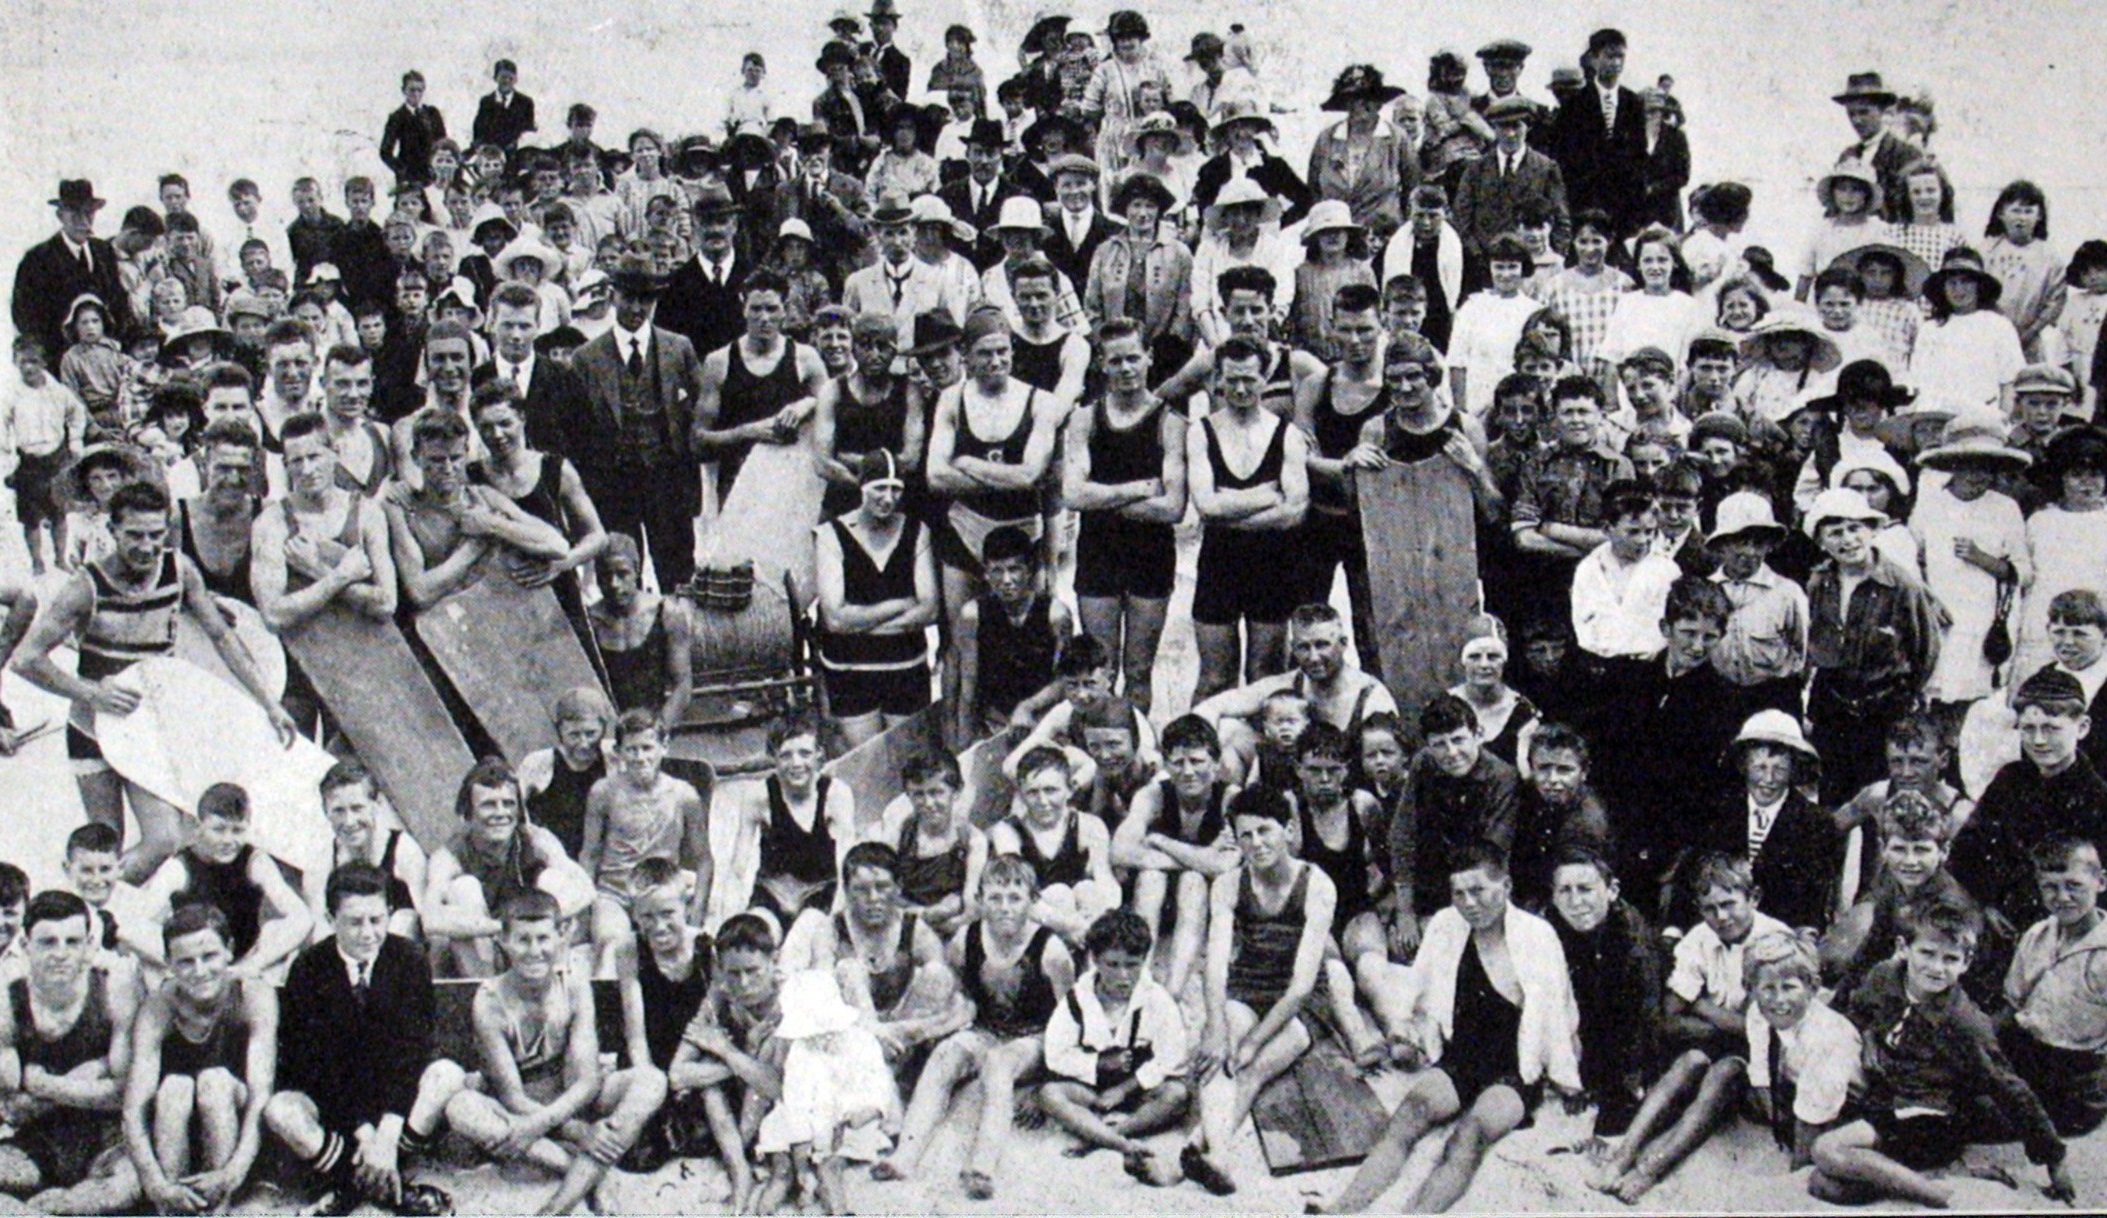 The opening of the St Clair Swimming Club. Otago Witness, 24.12.1923.